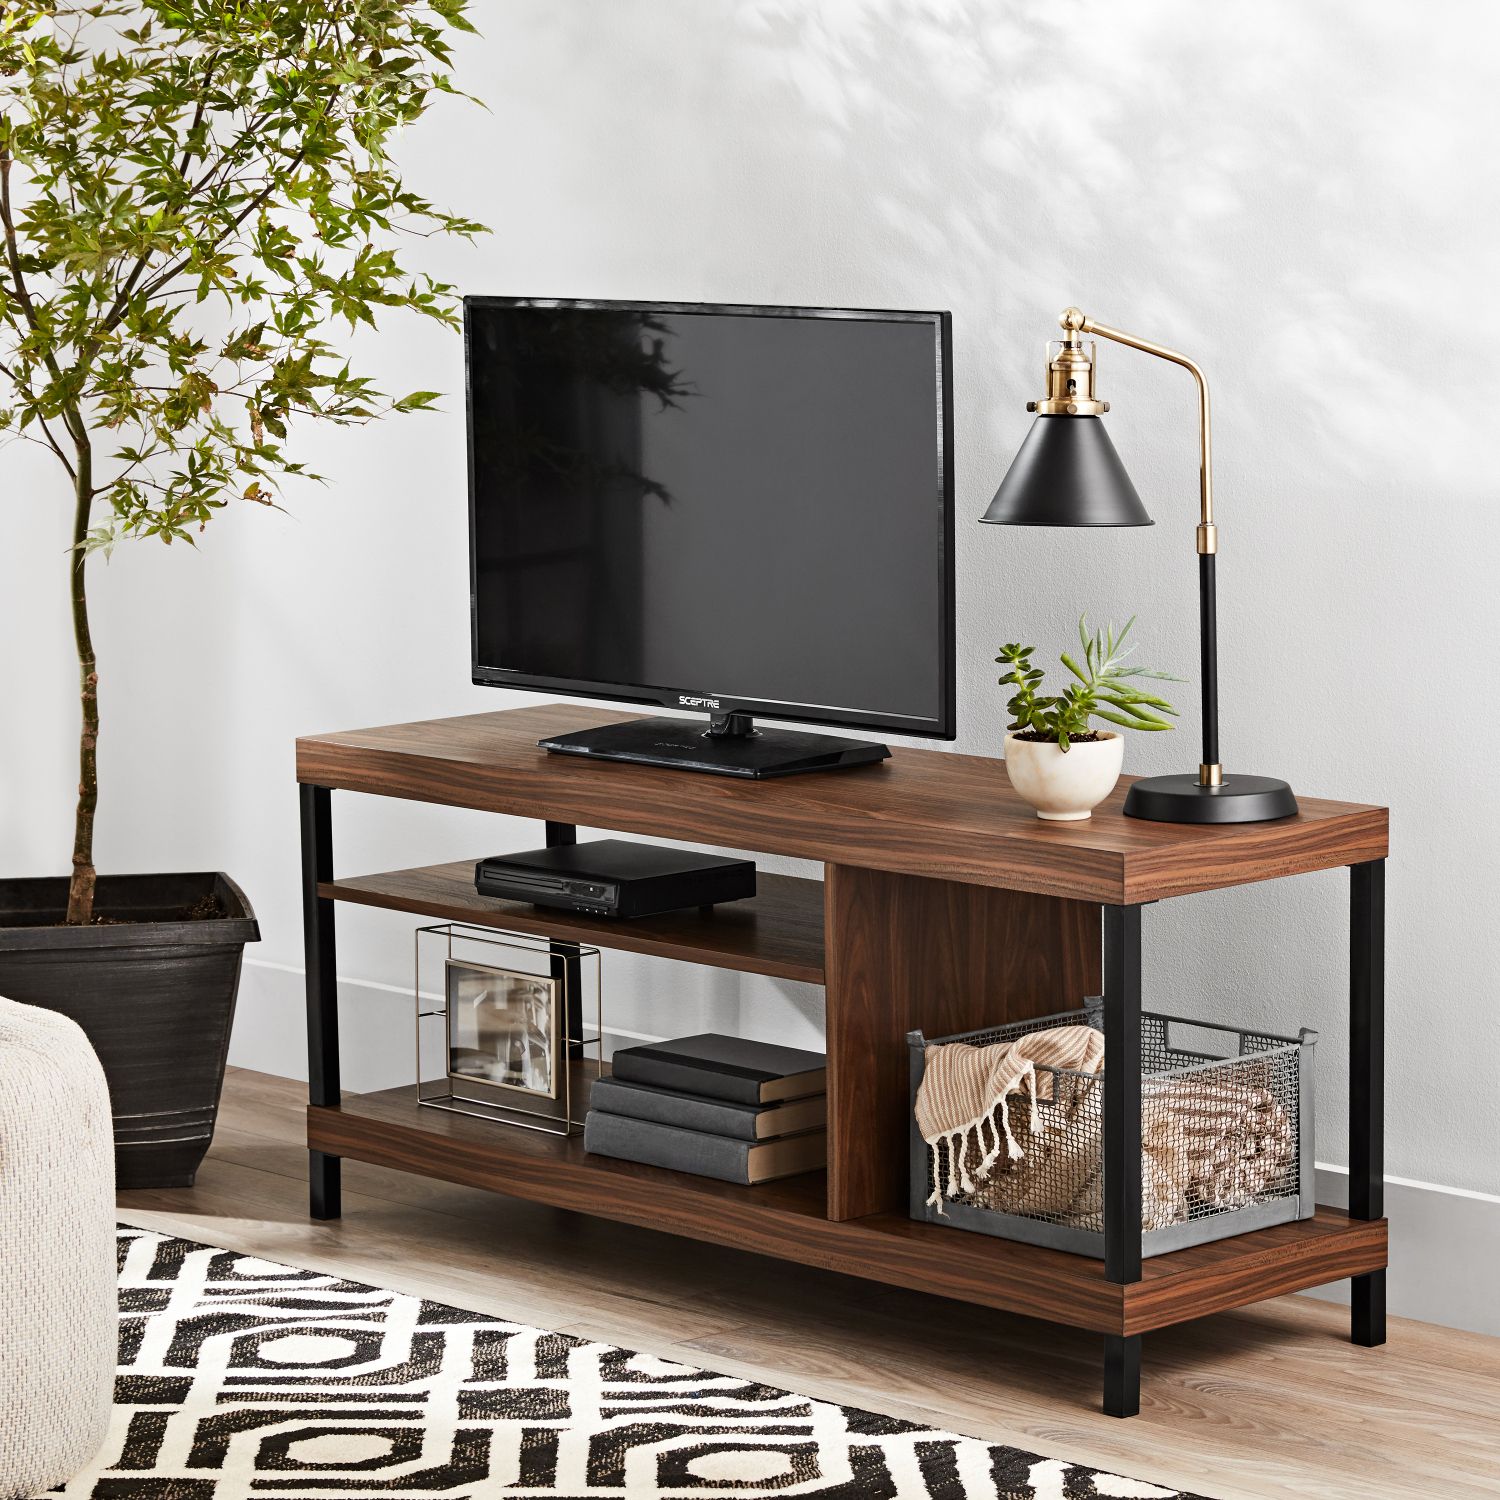 Mainstays Sumpter Park Collection Media Tv Stand For Tvs For Canyon Oak Tv Stands (View 11 of 15)